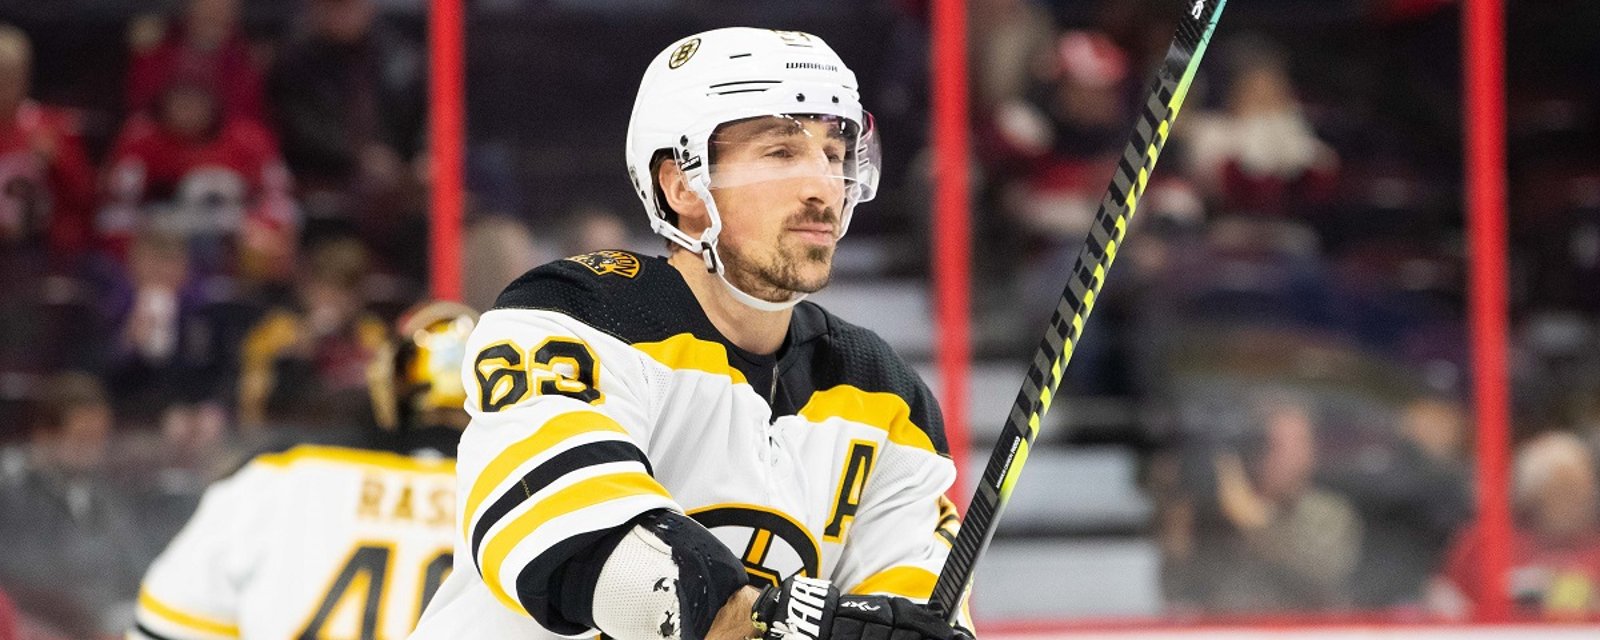 Brad Marchand gets roasted by his own team on social media.